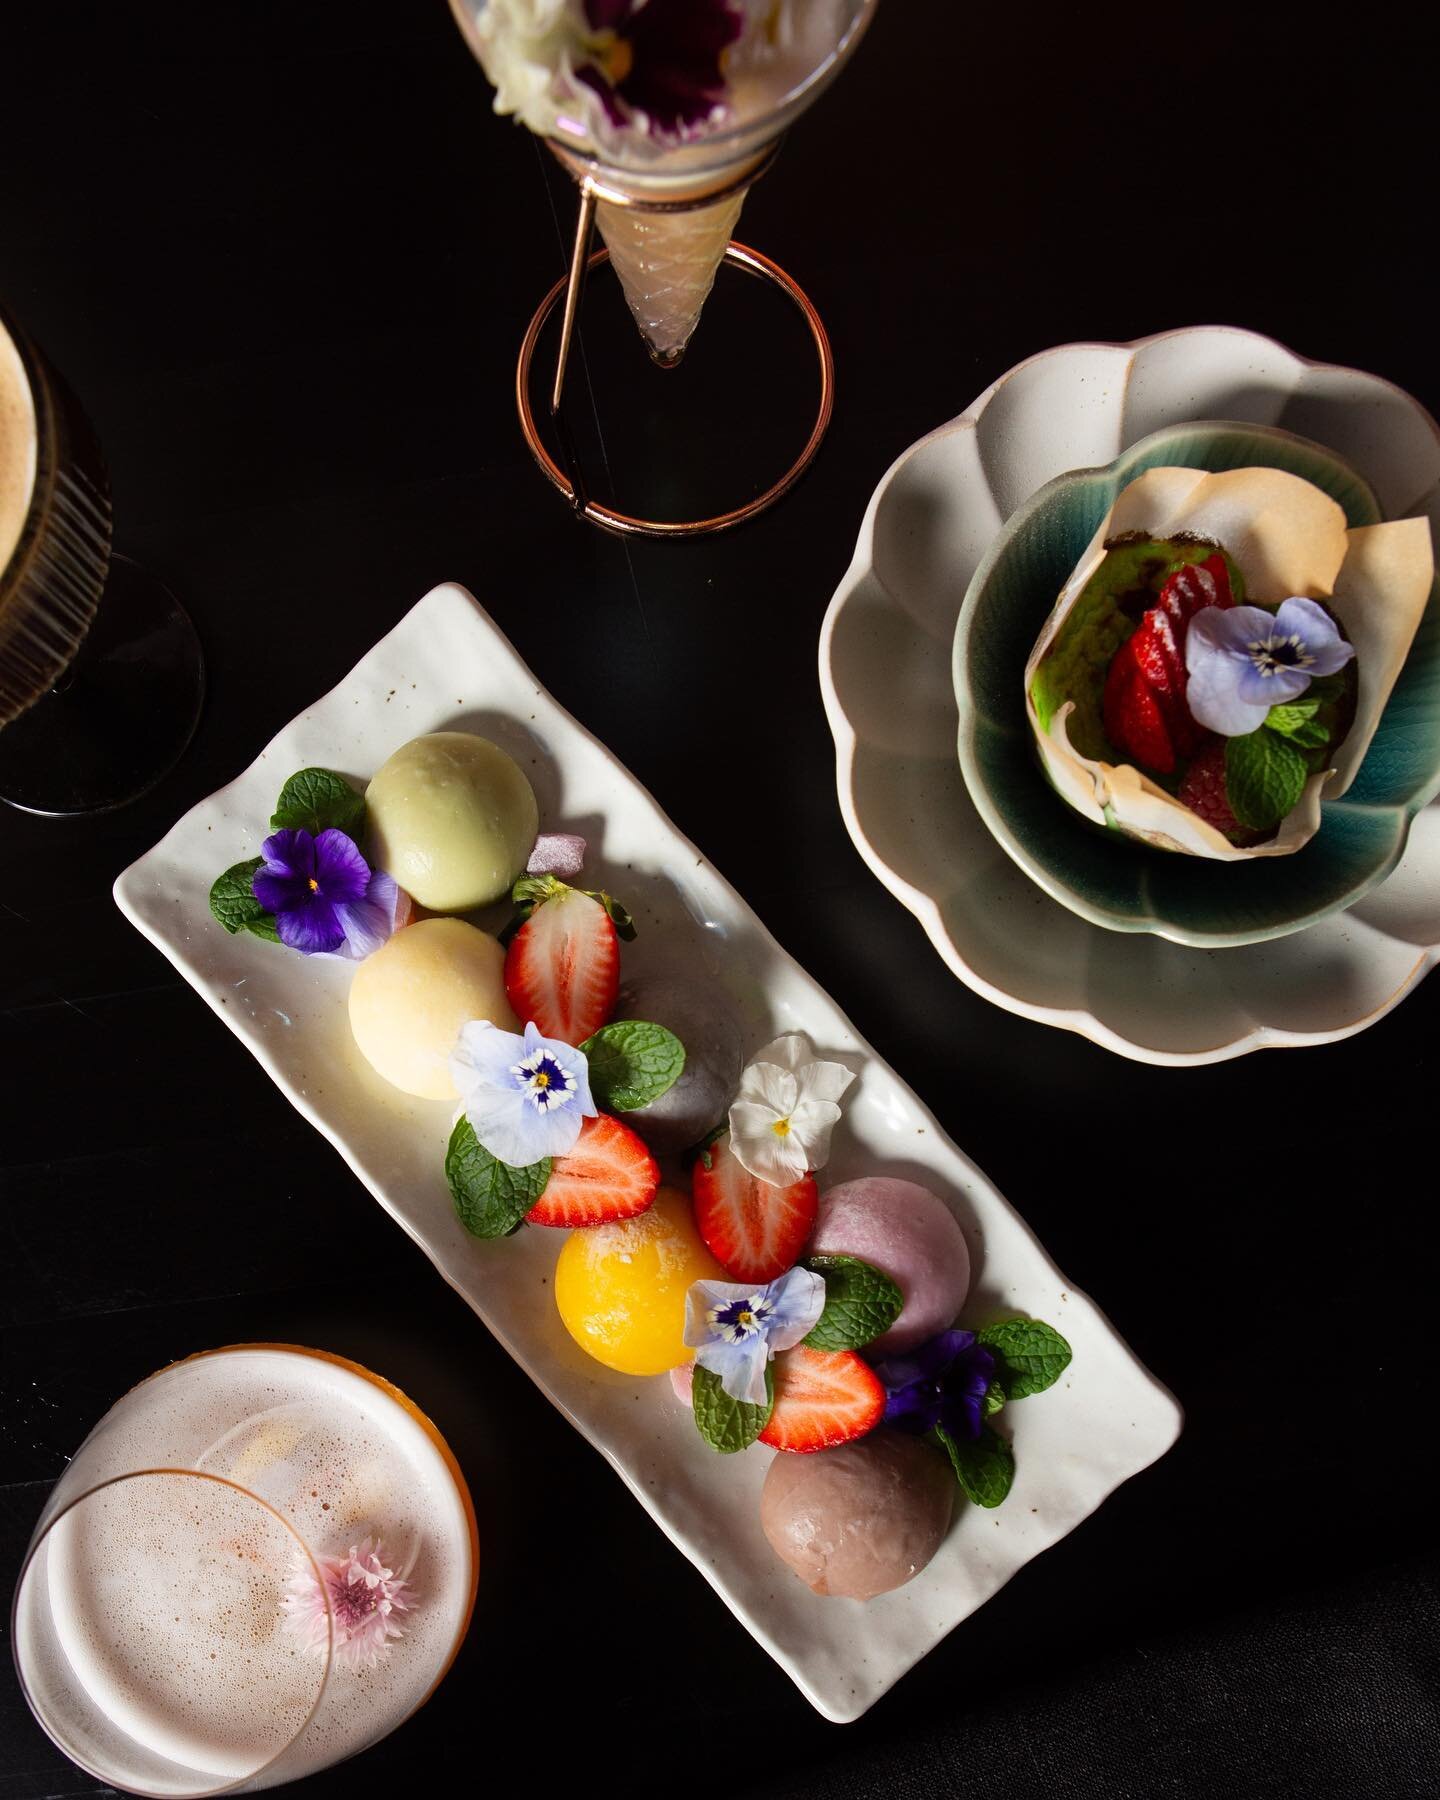 The perfect way to finish a meal is with dessert AND dessert cocktails. Pair our assorted Mochi with Coco Nutty cocktail for the finale to your dinner. 

Book via the website
Walk ins welcome
131 Church St Brighton

#BobbiPearl #MelbourneFoodie #Brig